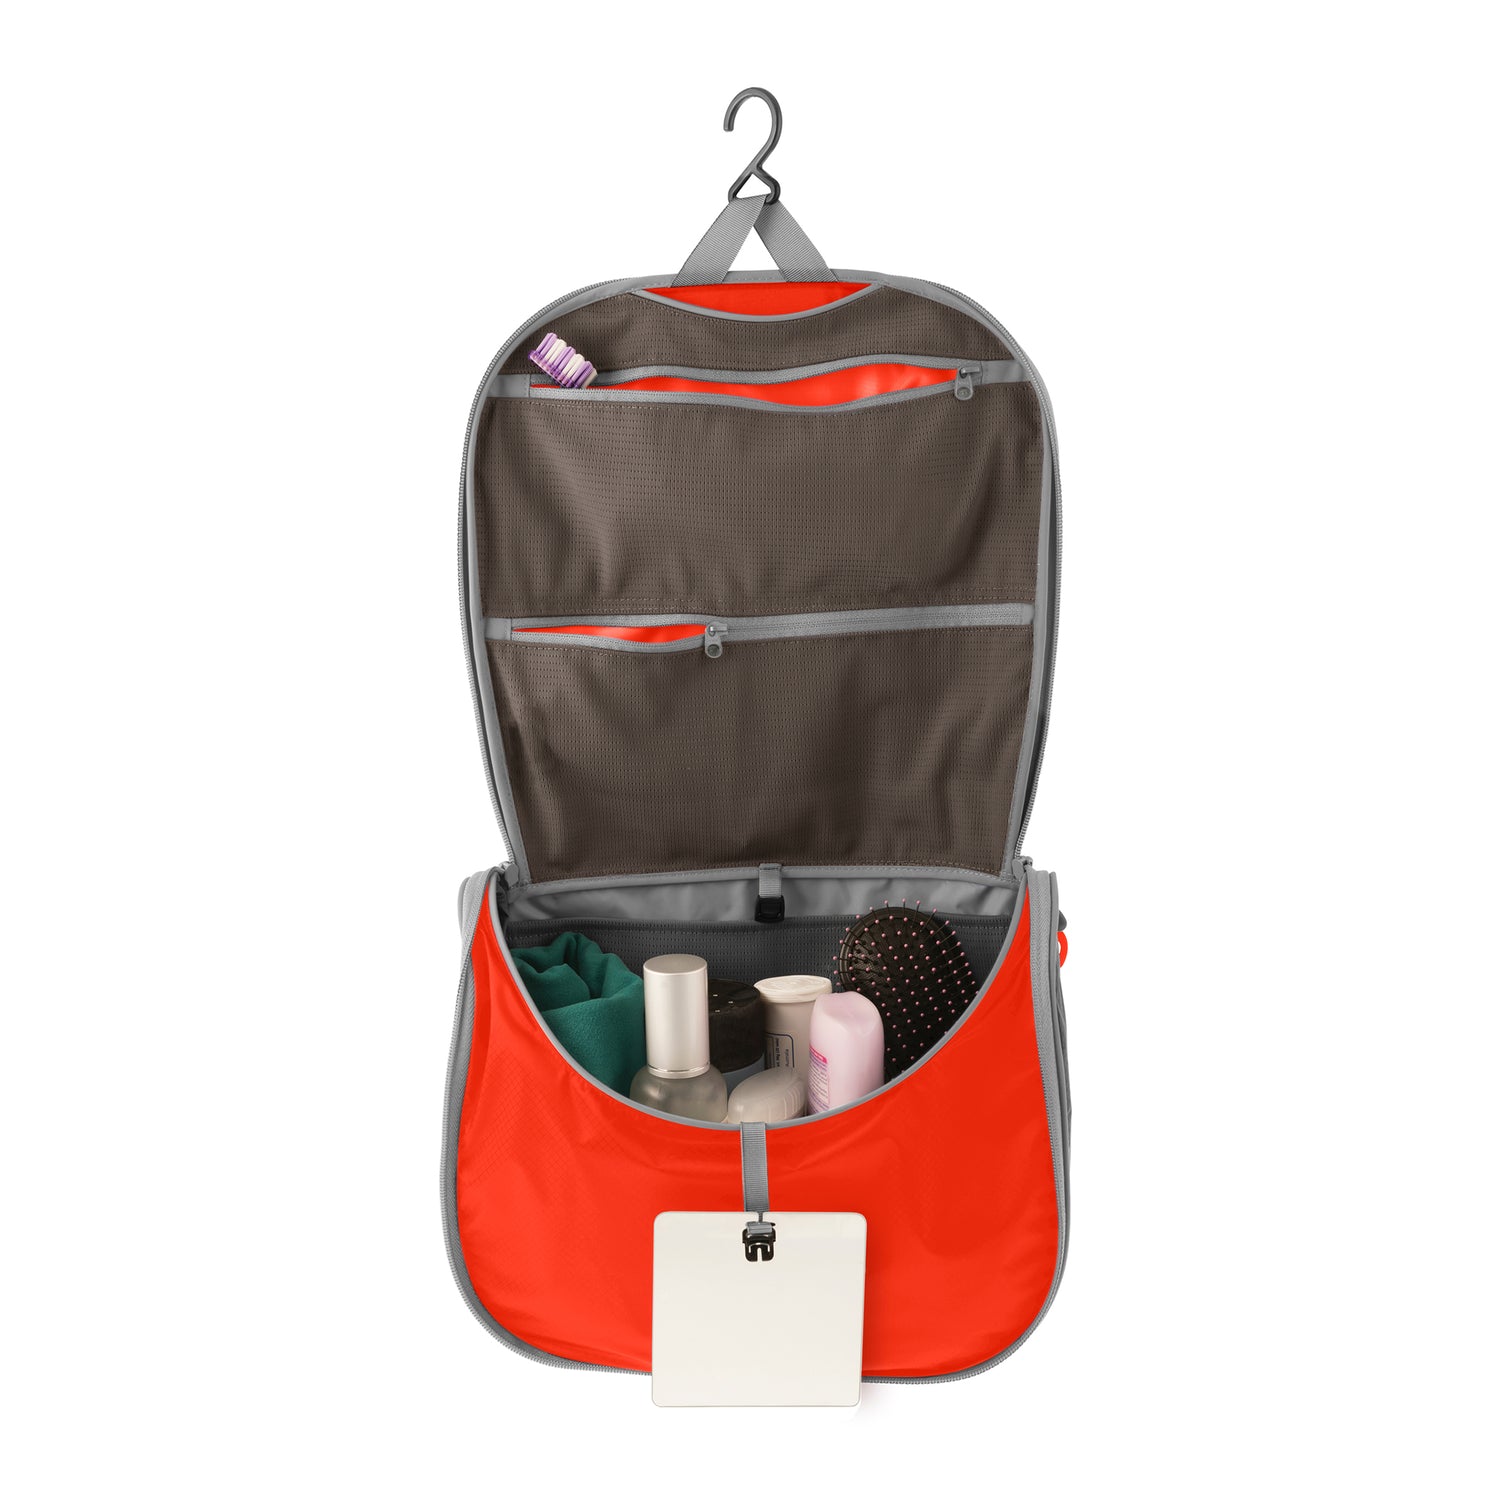 Away The Hanging Toiletry Bag Review